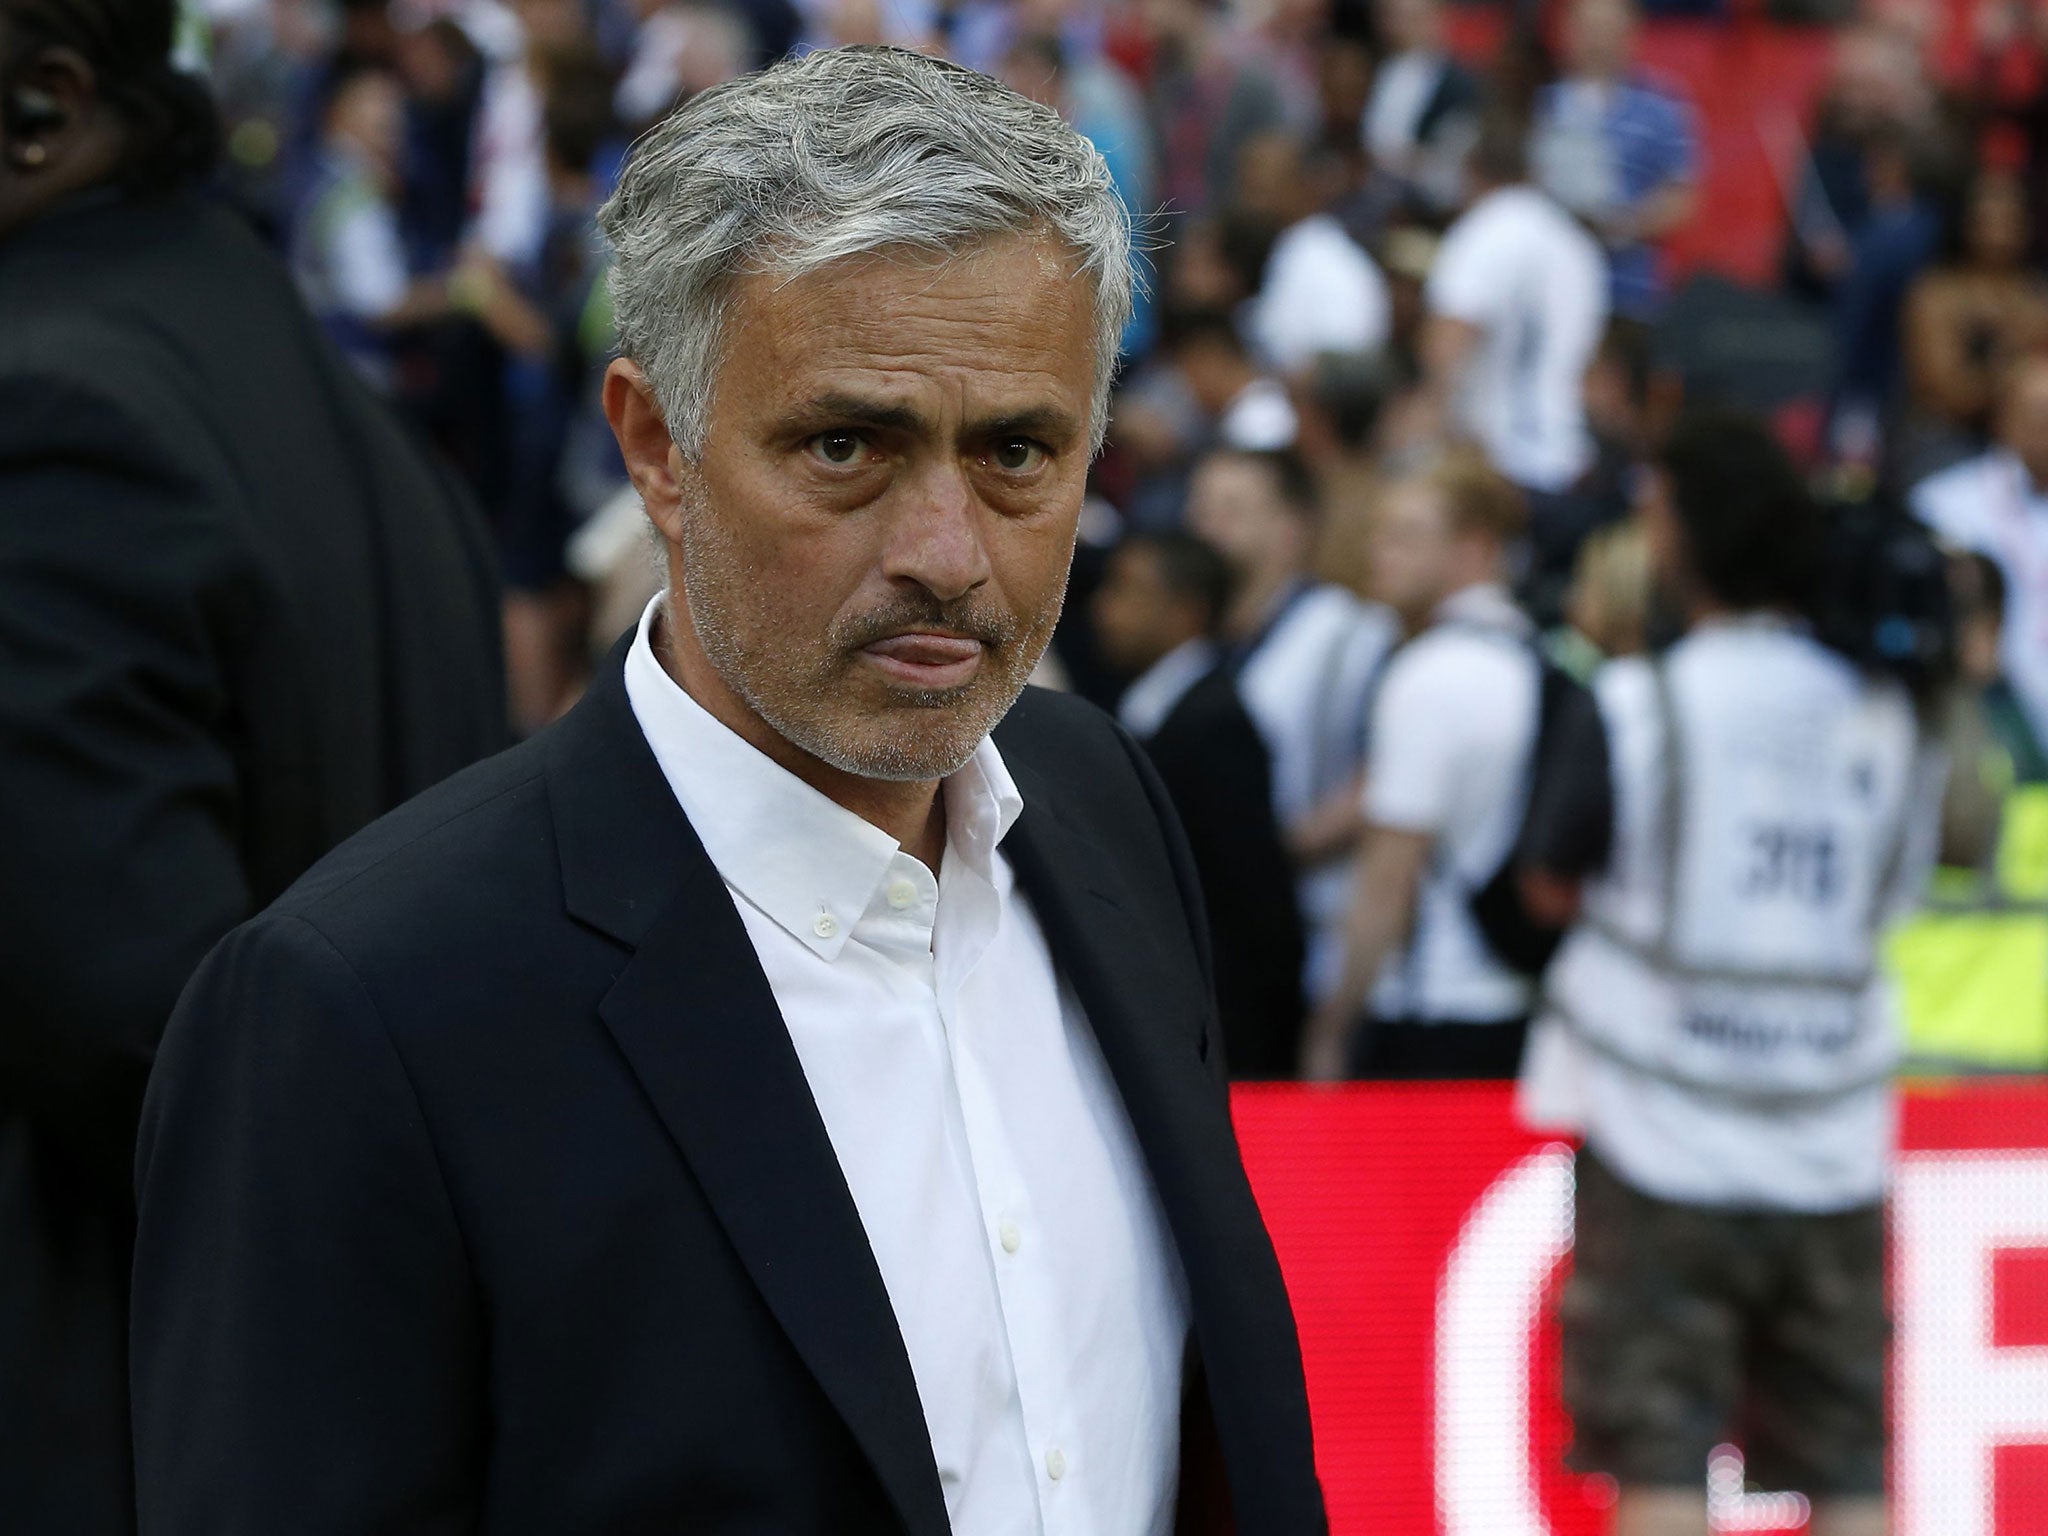 Jose Mourinho was in a surly mood after the defeat at Wembley